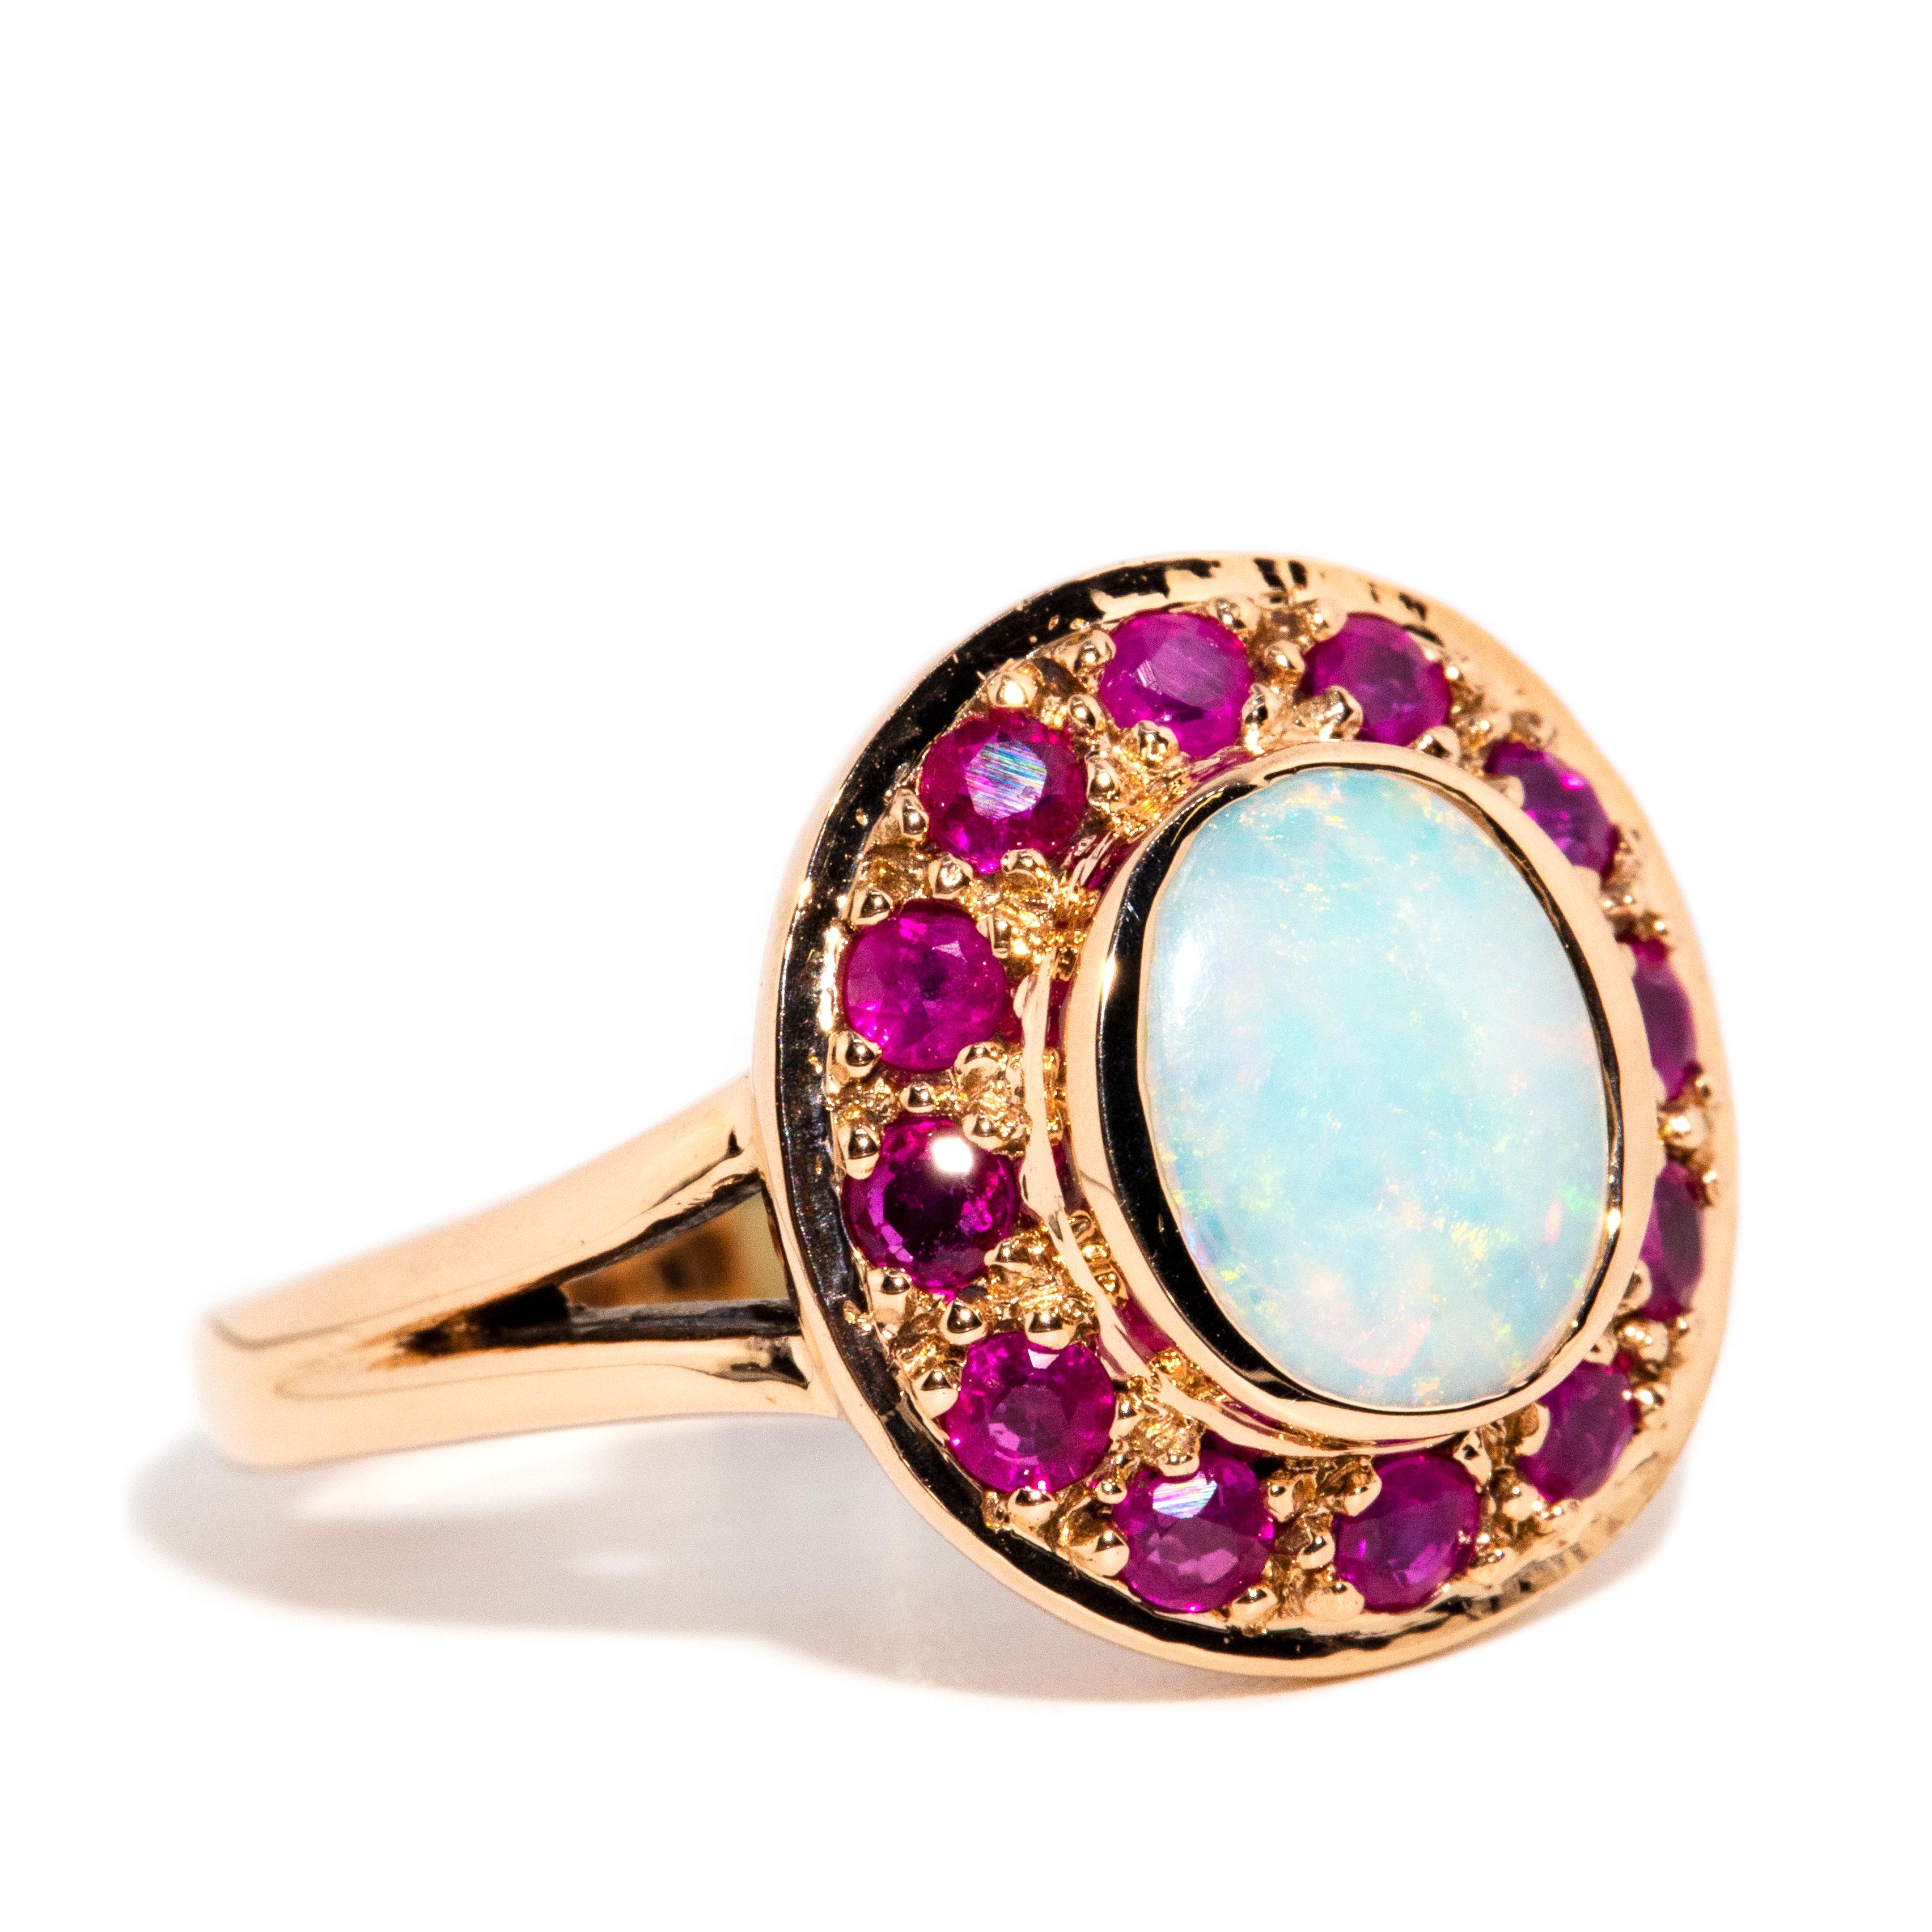 Contemporary Vintage Inspired Solid Opal Cabochon & Purple Red Ruby Ring 9 Carat Yellow Gold